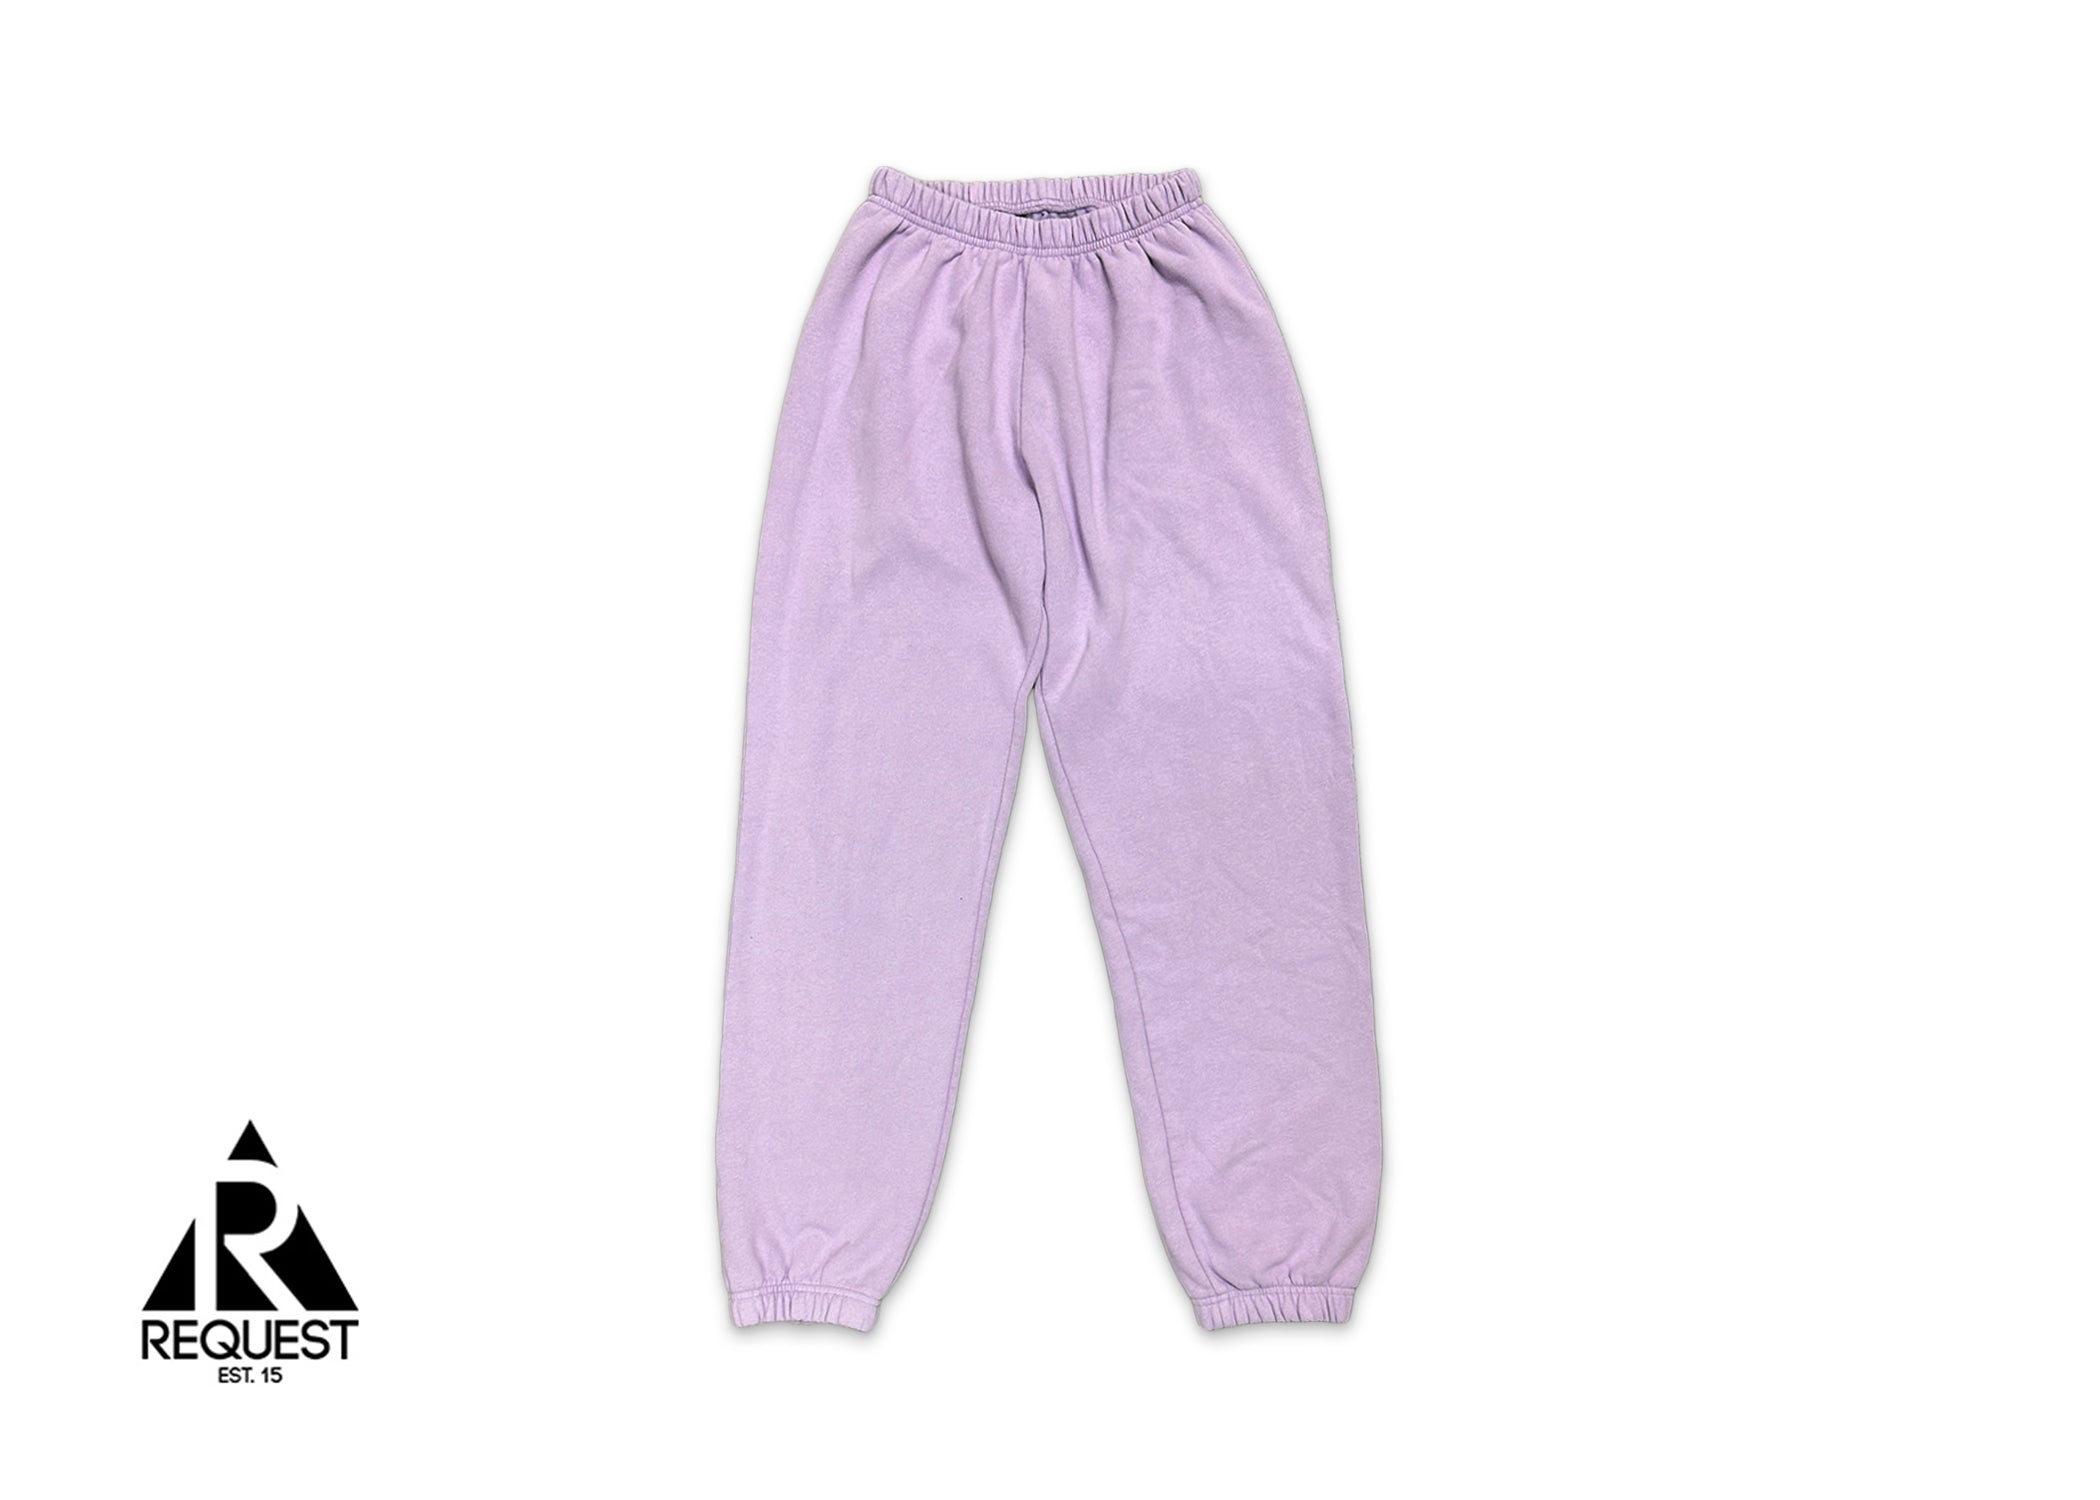 ERL Relaxed Fit Sweatpants "Lilac"